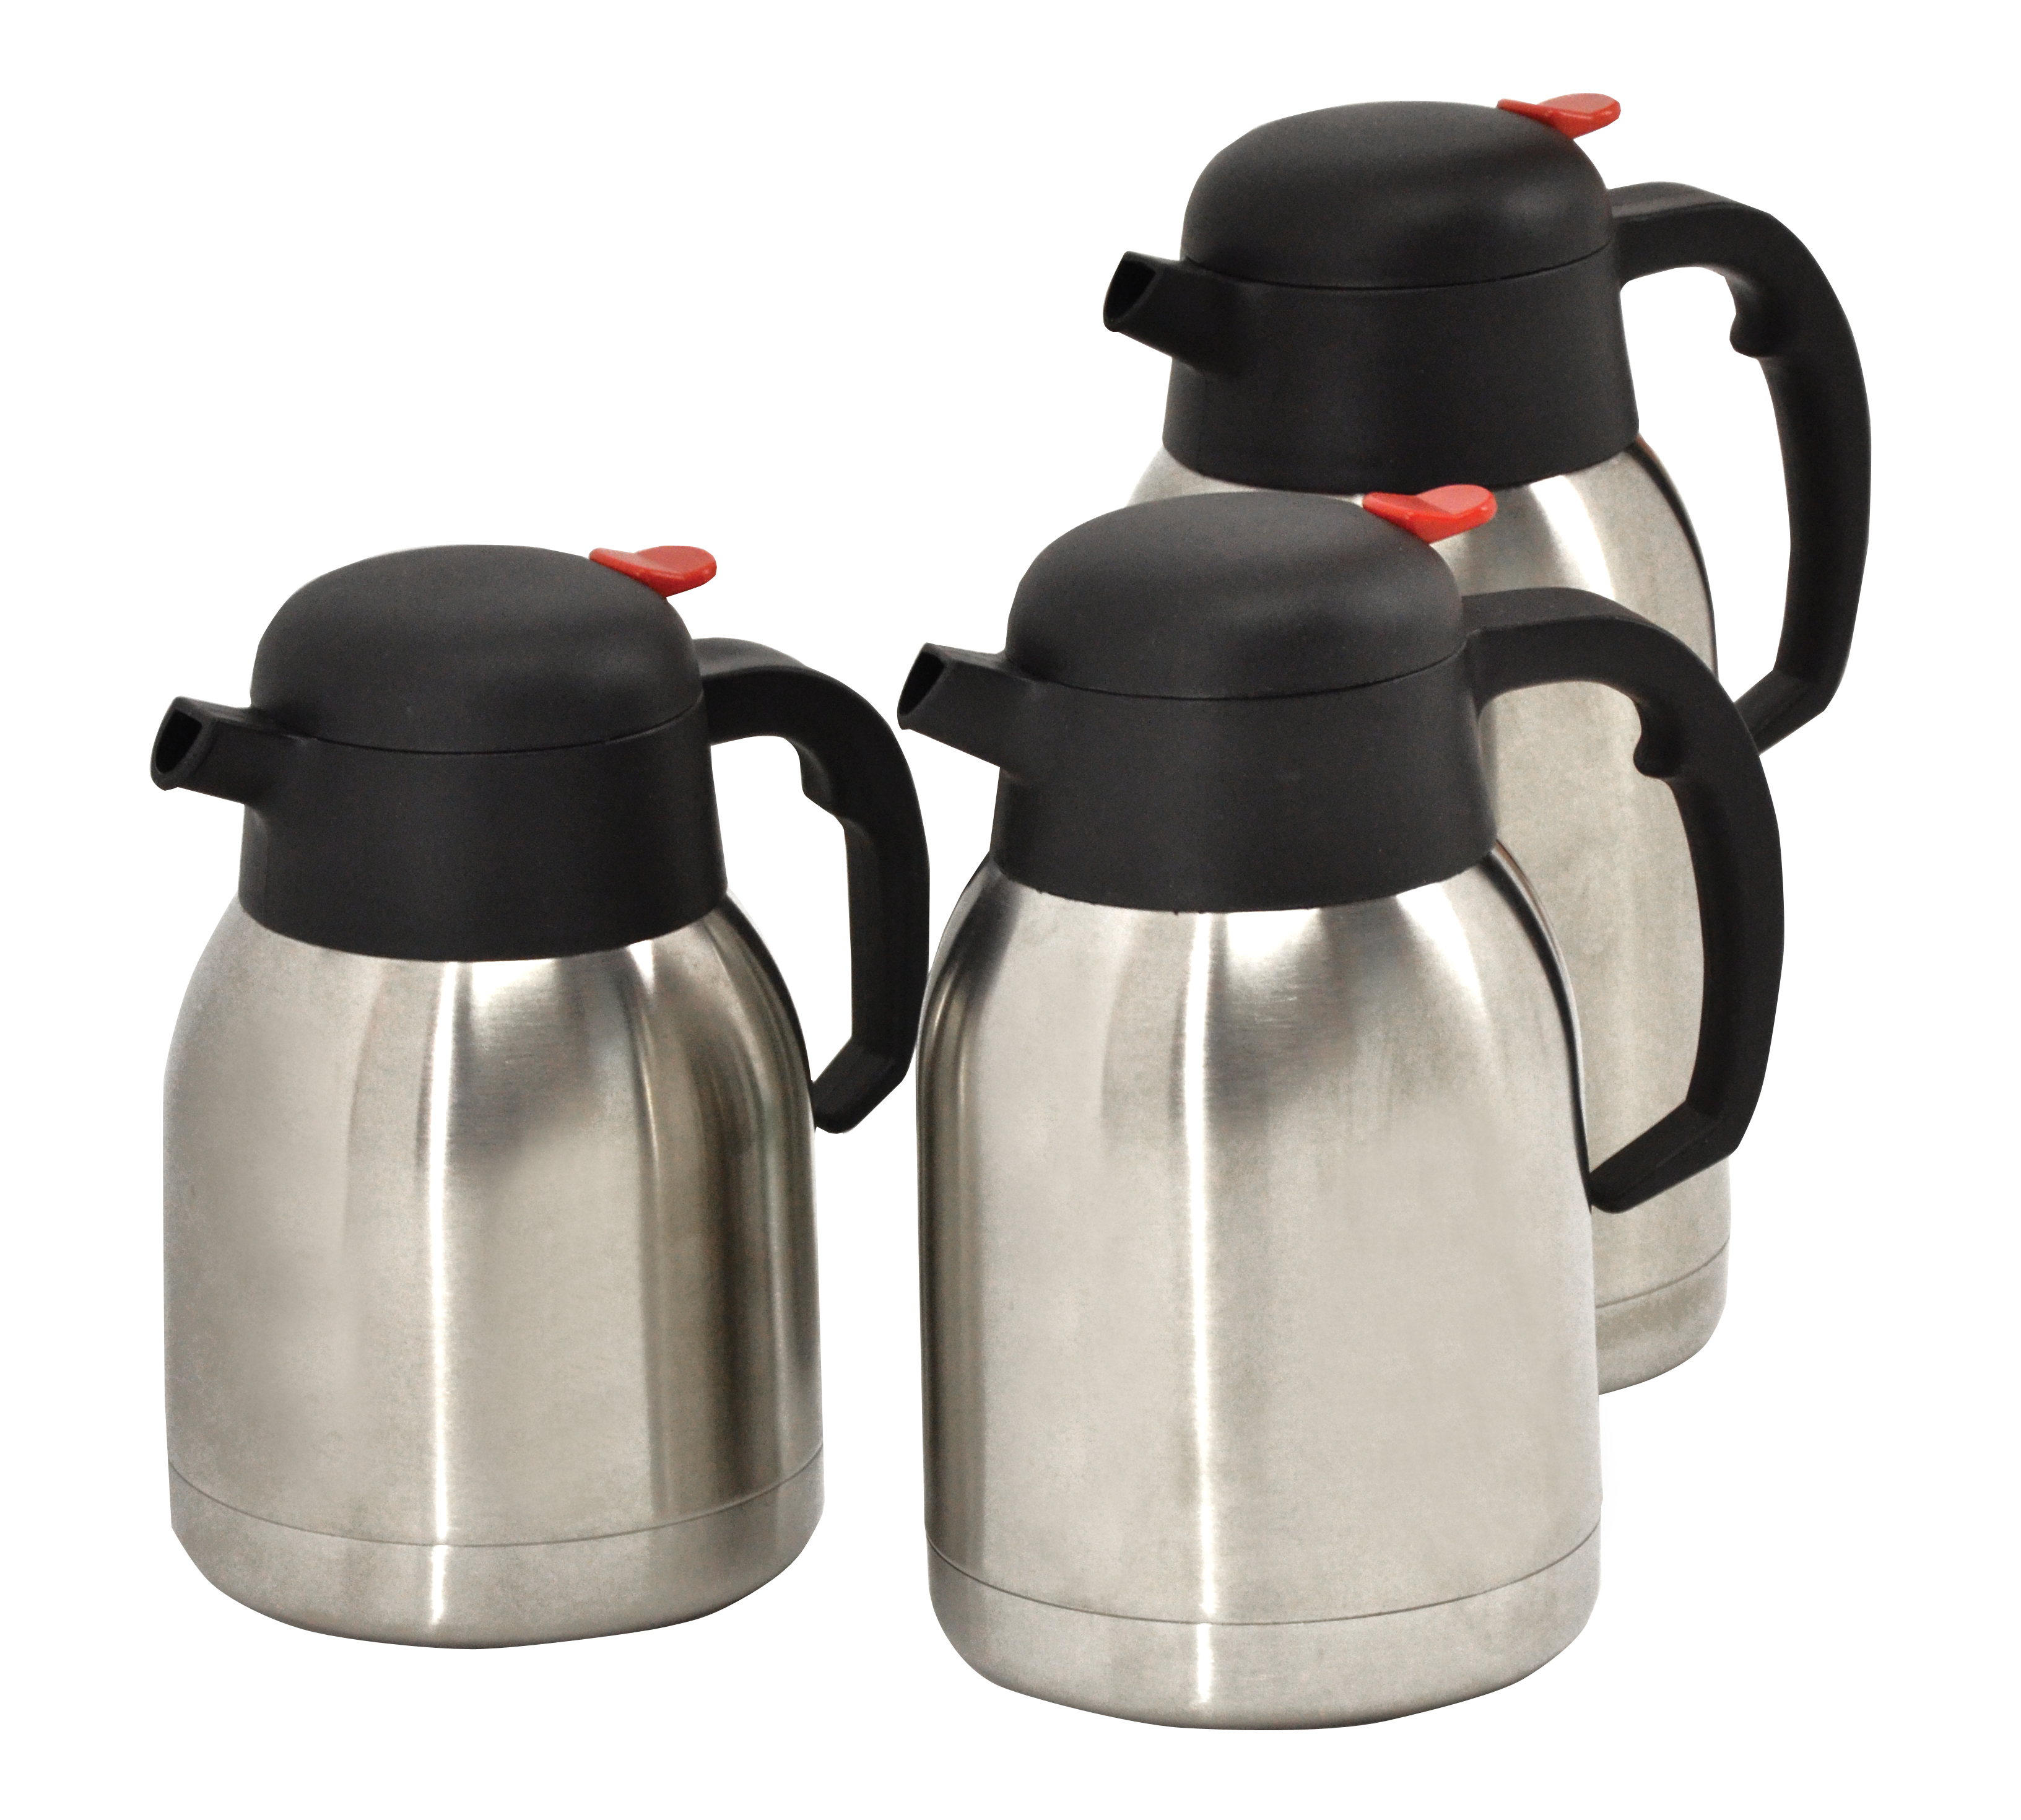 Thermal Coffee Carafe Dispenser 51 Oz/ 1.5 L - Double Wall Vacuum